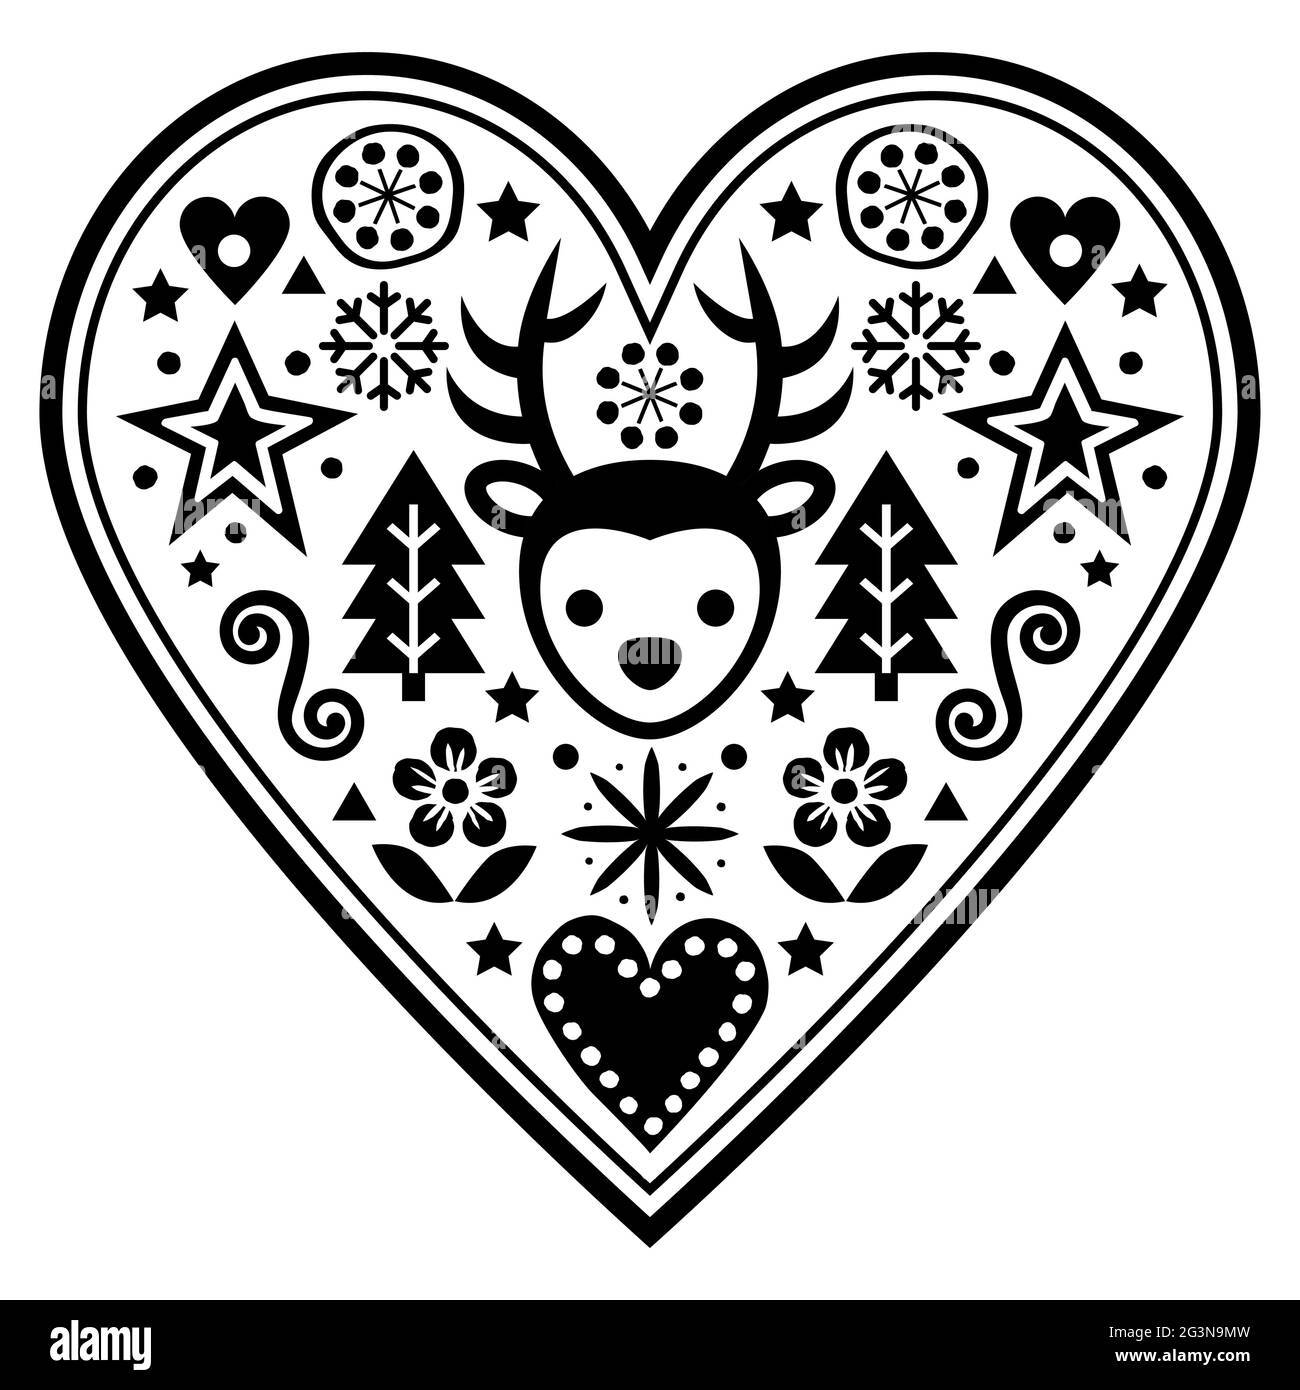 Christmas Scandinavian vector heart greeting card design - black and white folk art style pattern with reindeer, snowflakes Xmas trees and flowers Stock Vector